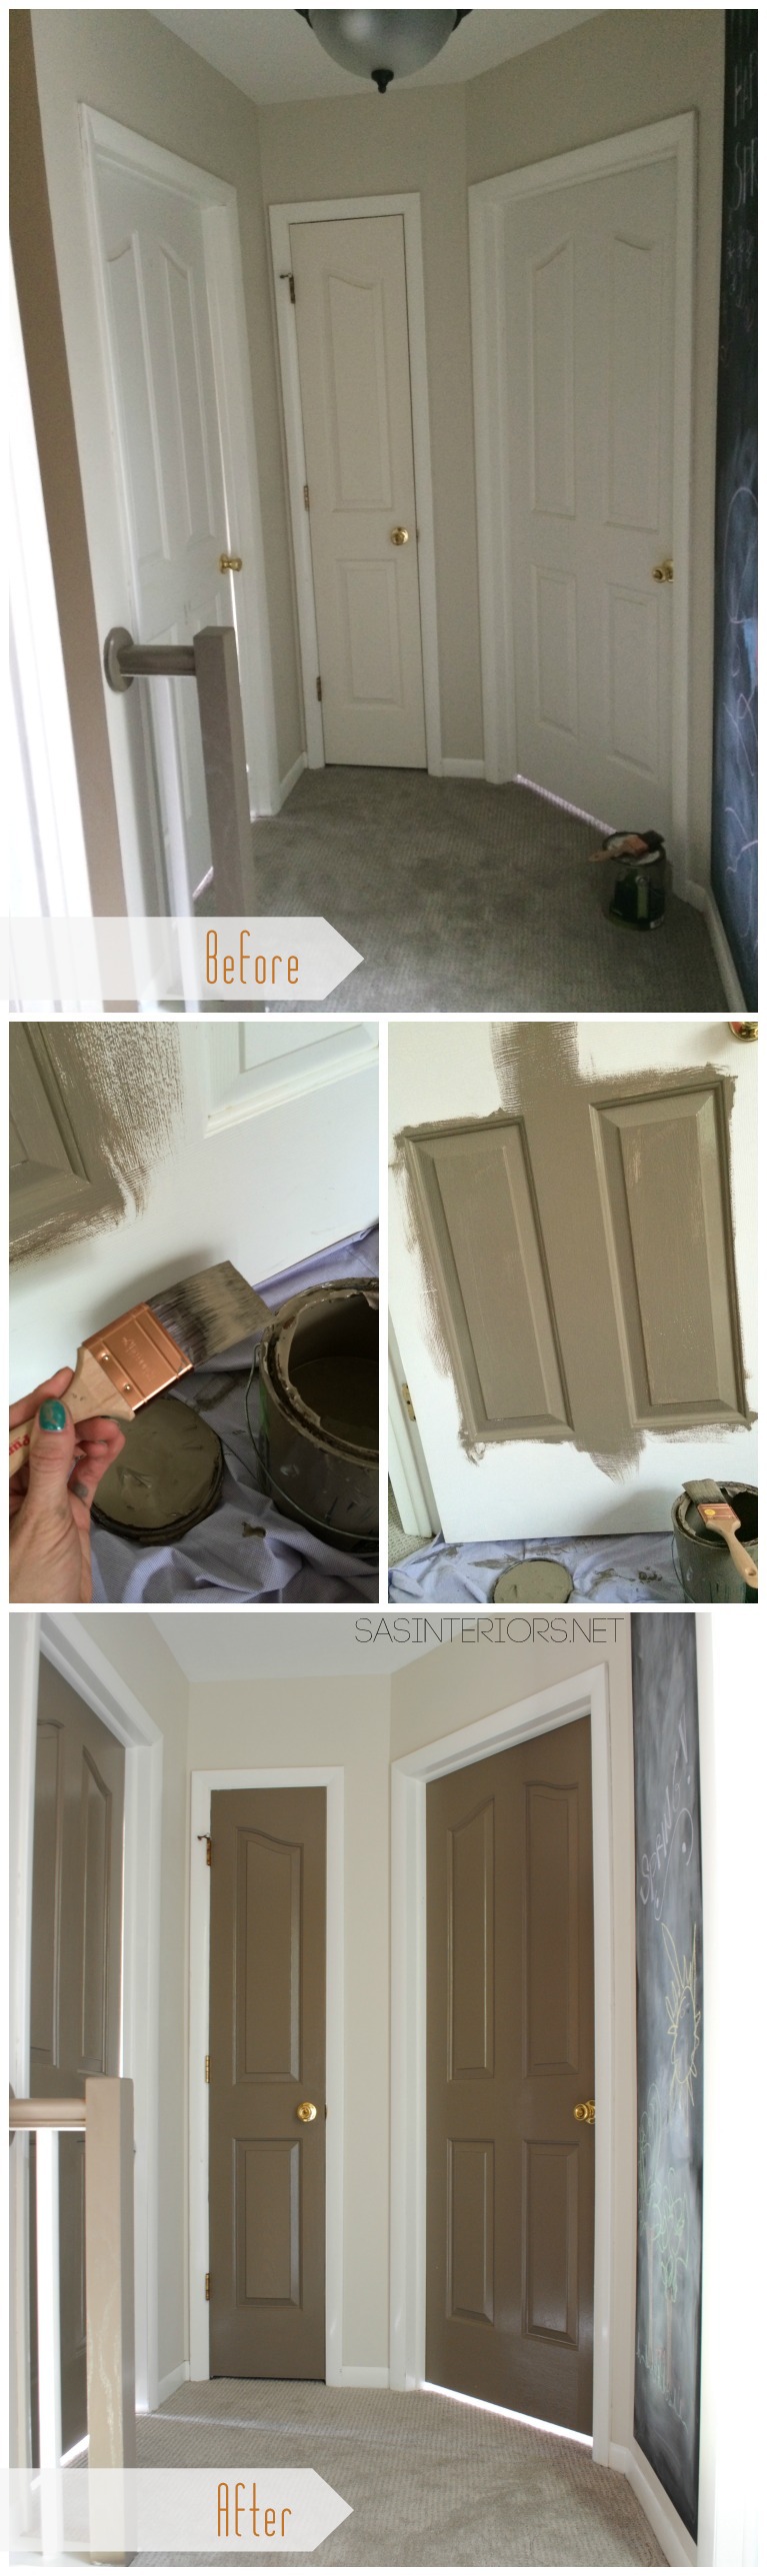 Add a Pop of COLOR by painting the door. Ditch the typical white (interior or exterior) door and add a splash of color. Check out this great how-to with 5 easy steps to transform a door!